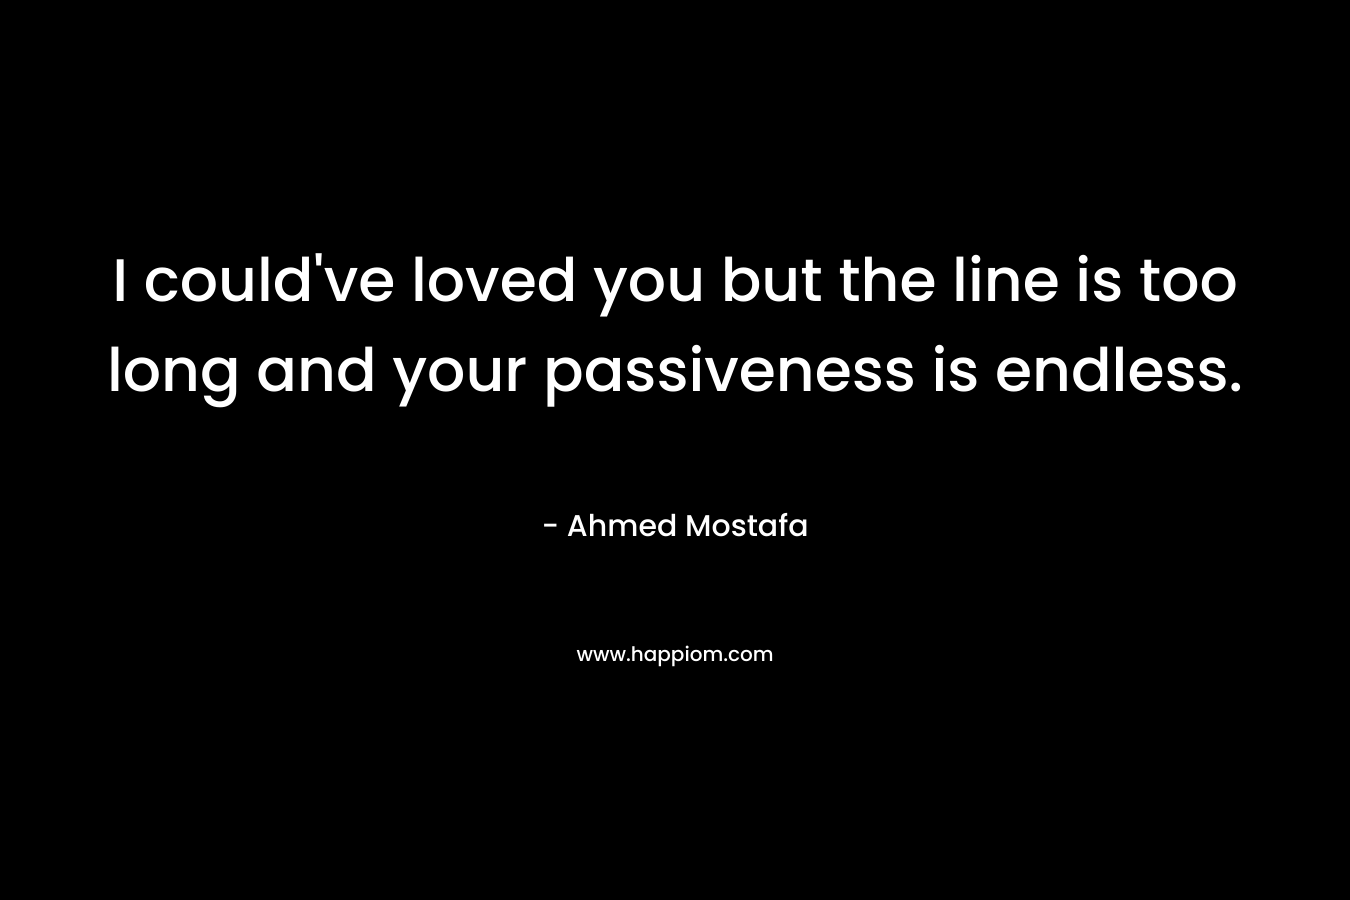 I could've loved you but the line is too long and your passiveness is endless.